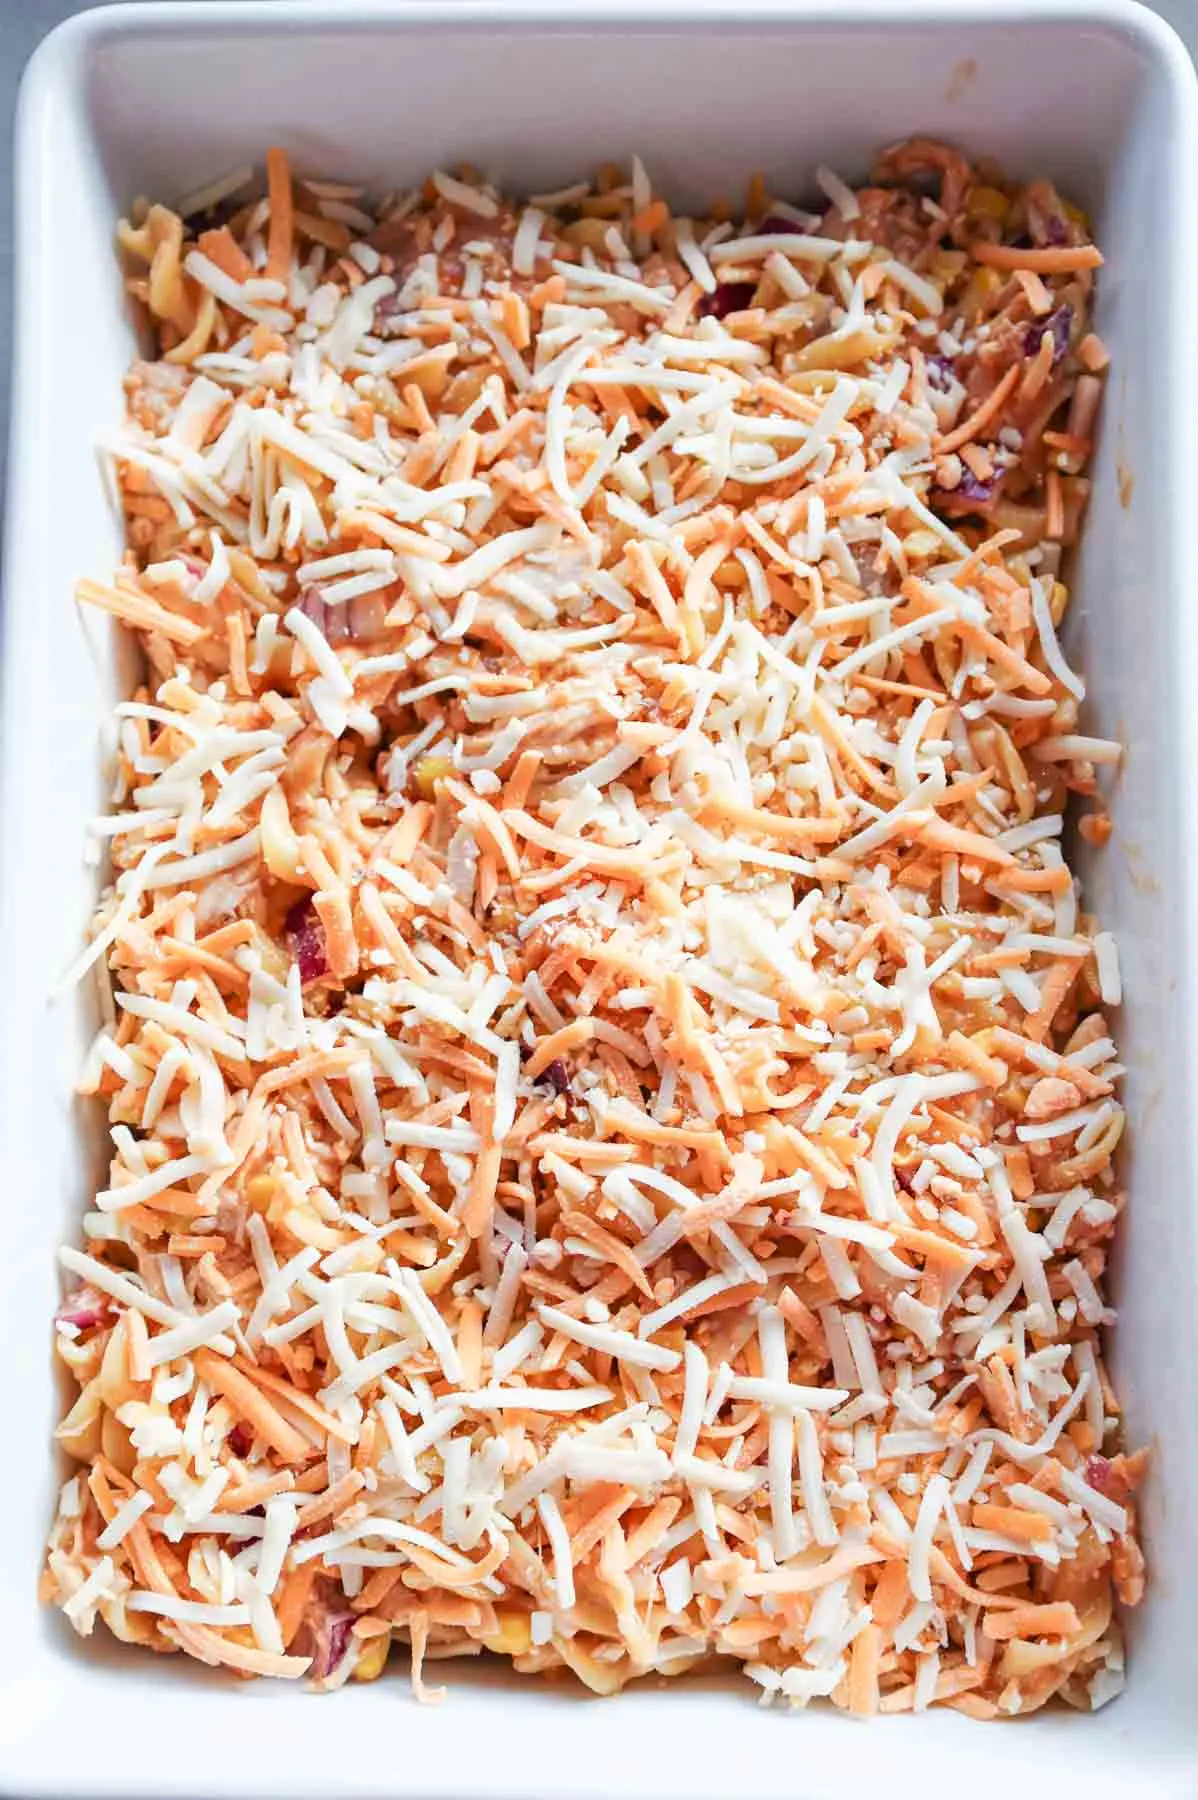 shredded cheese on top of barbecue chicken and egg noodle mixture in a baking dish